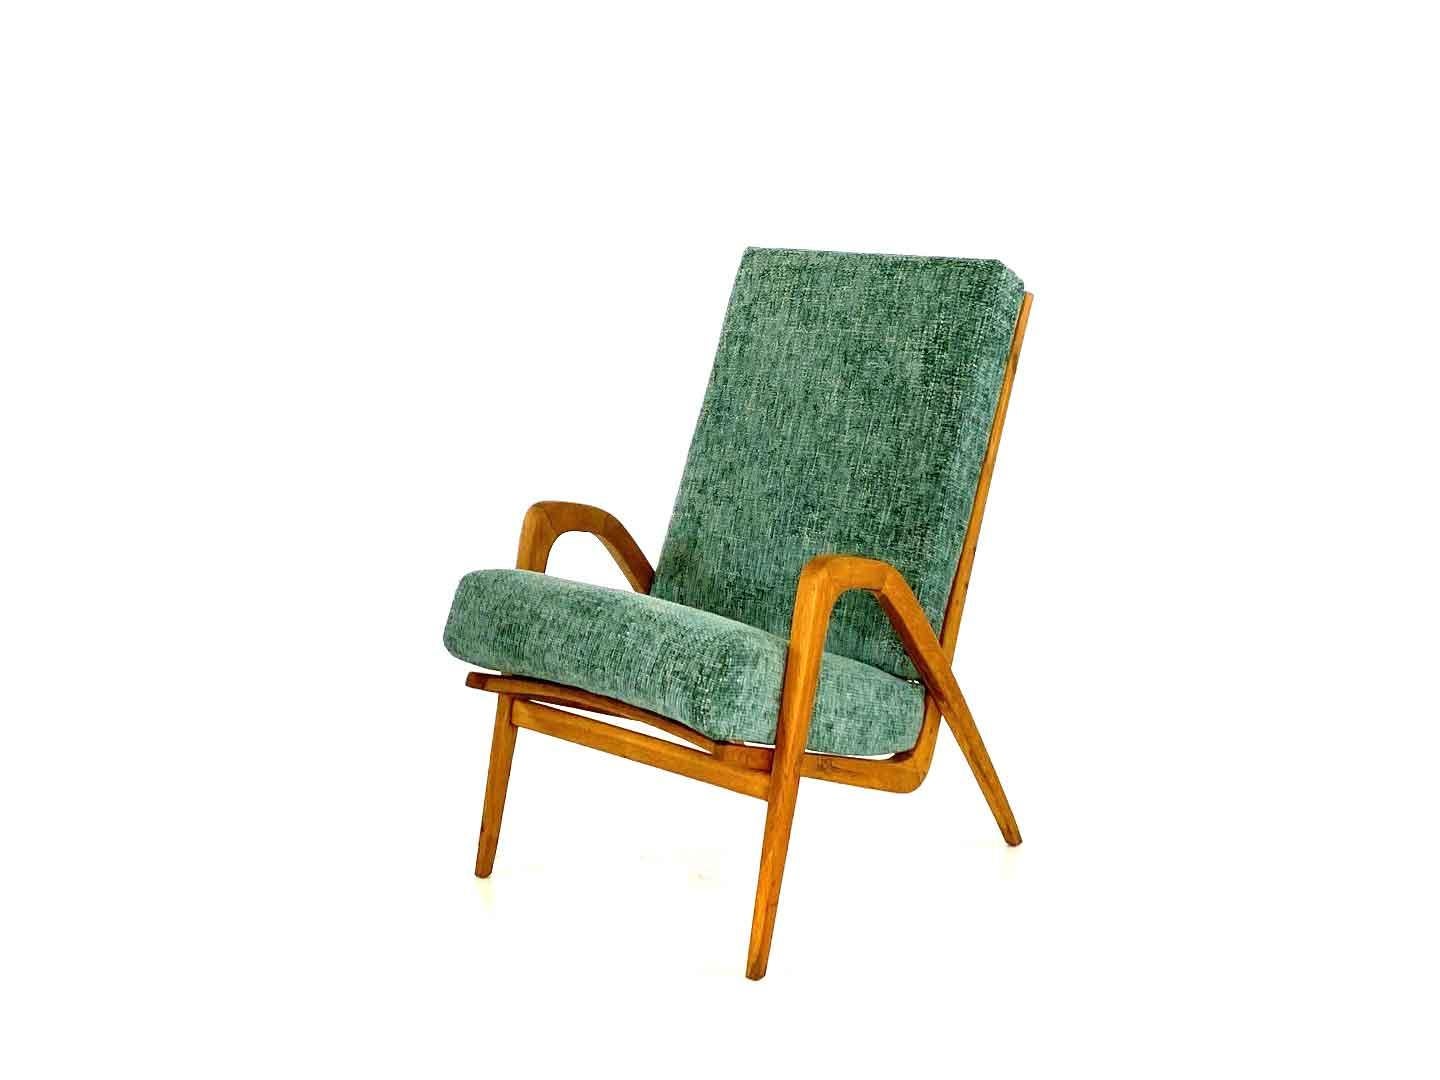 Unique vintage armchair designed by Jan Vanek for Úl'uv in the former Czecho-Slovakia in the 1960s. The oak minimalist frame provides great seating comfort and makes this armchair a true eyecatcher. The armchair has been reupholstered and is in